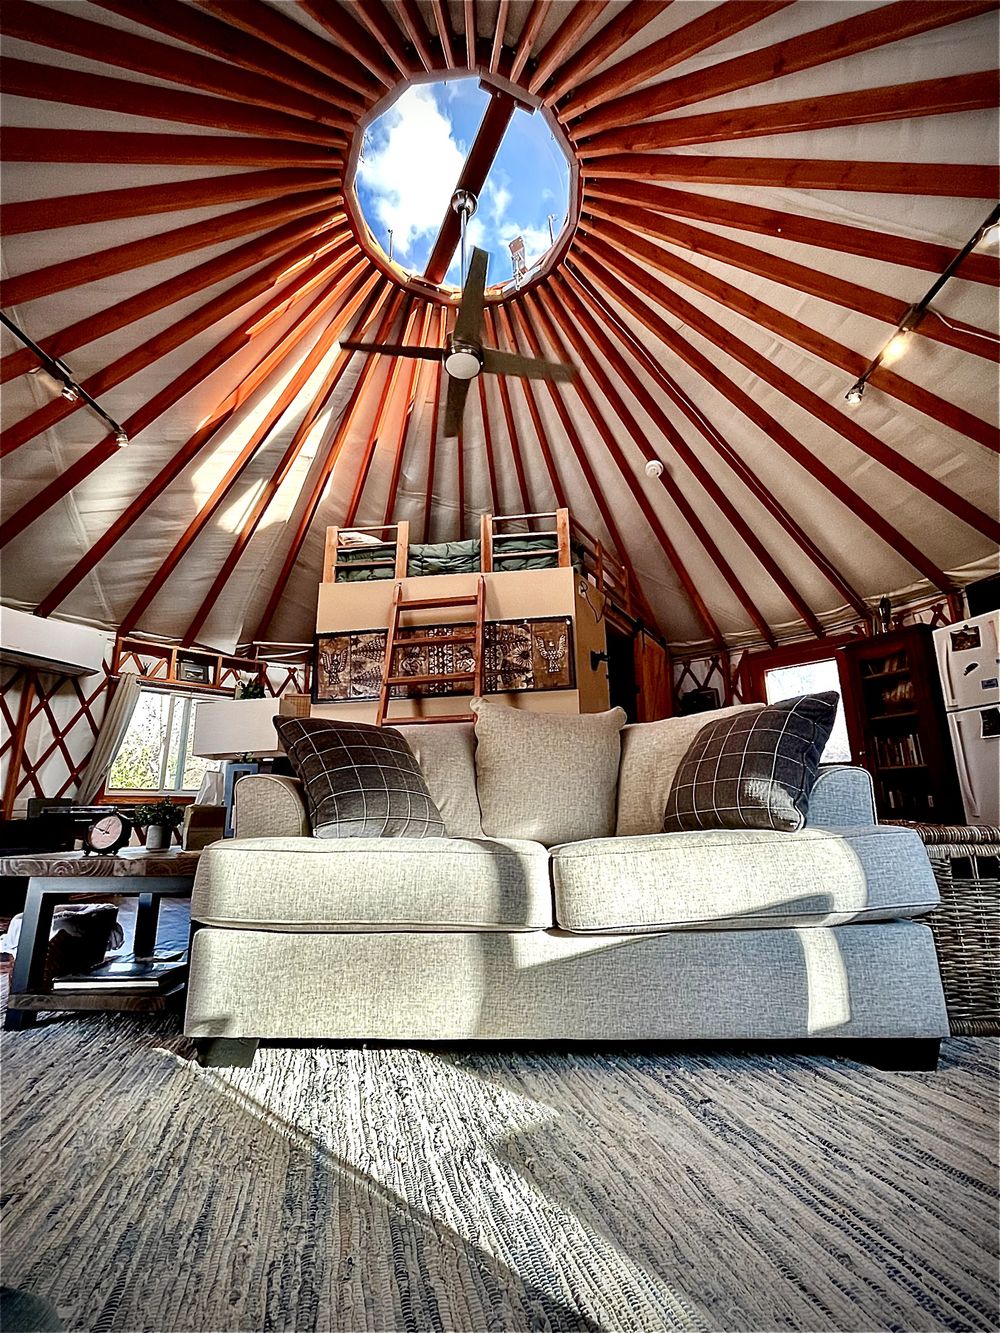 My Office is in a yurt about 5 miles northeast of Manhattan, KS